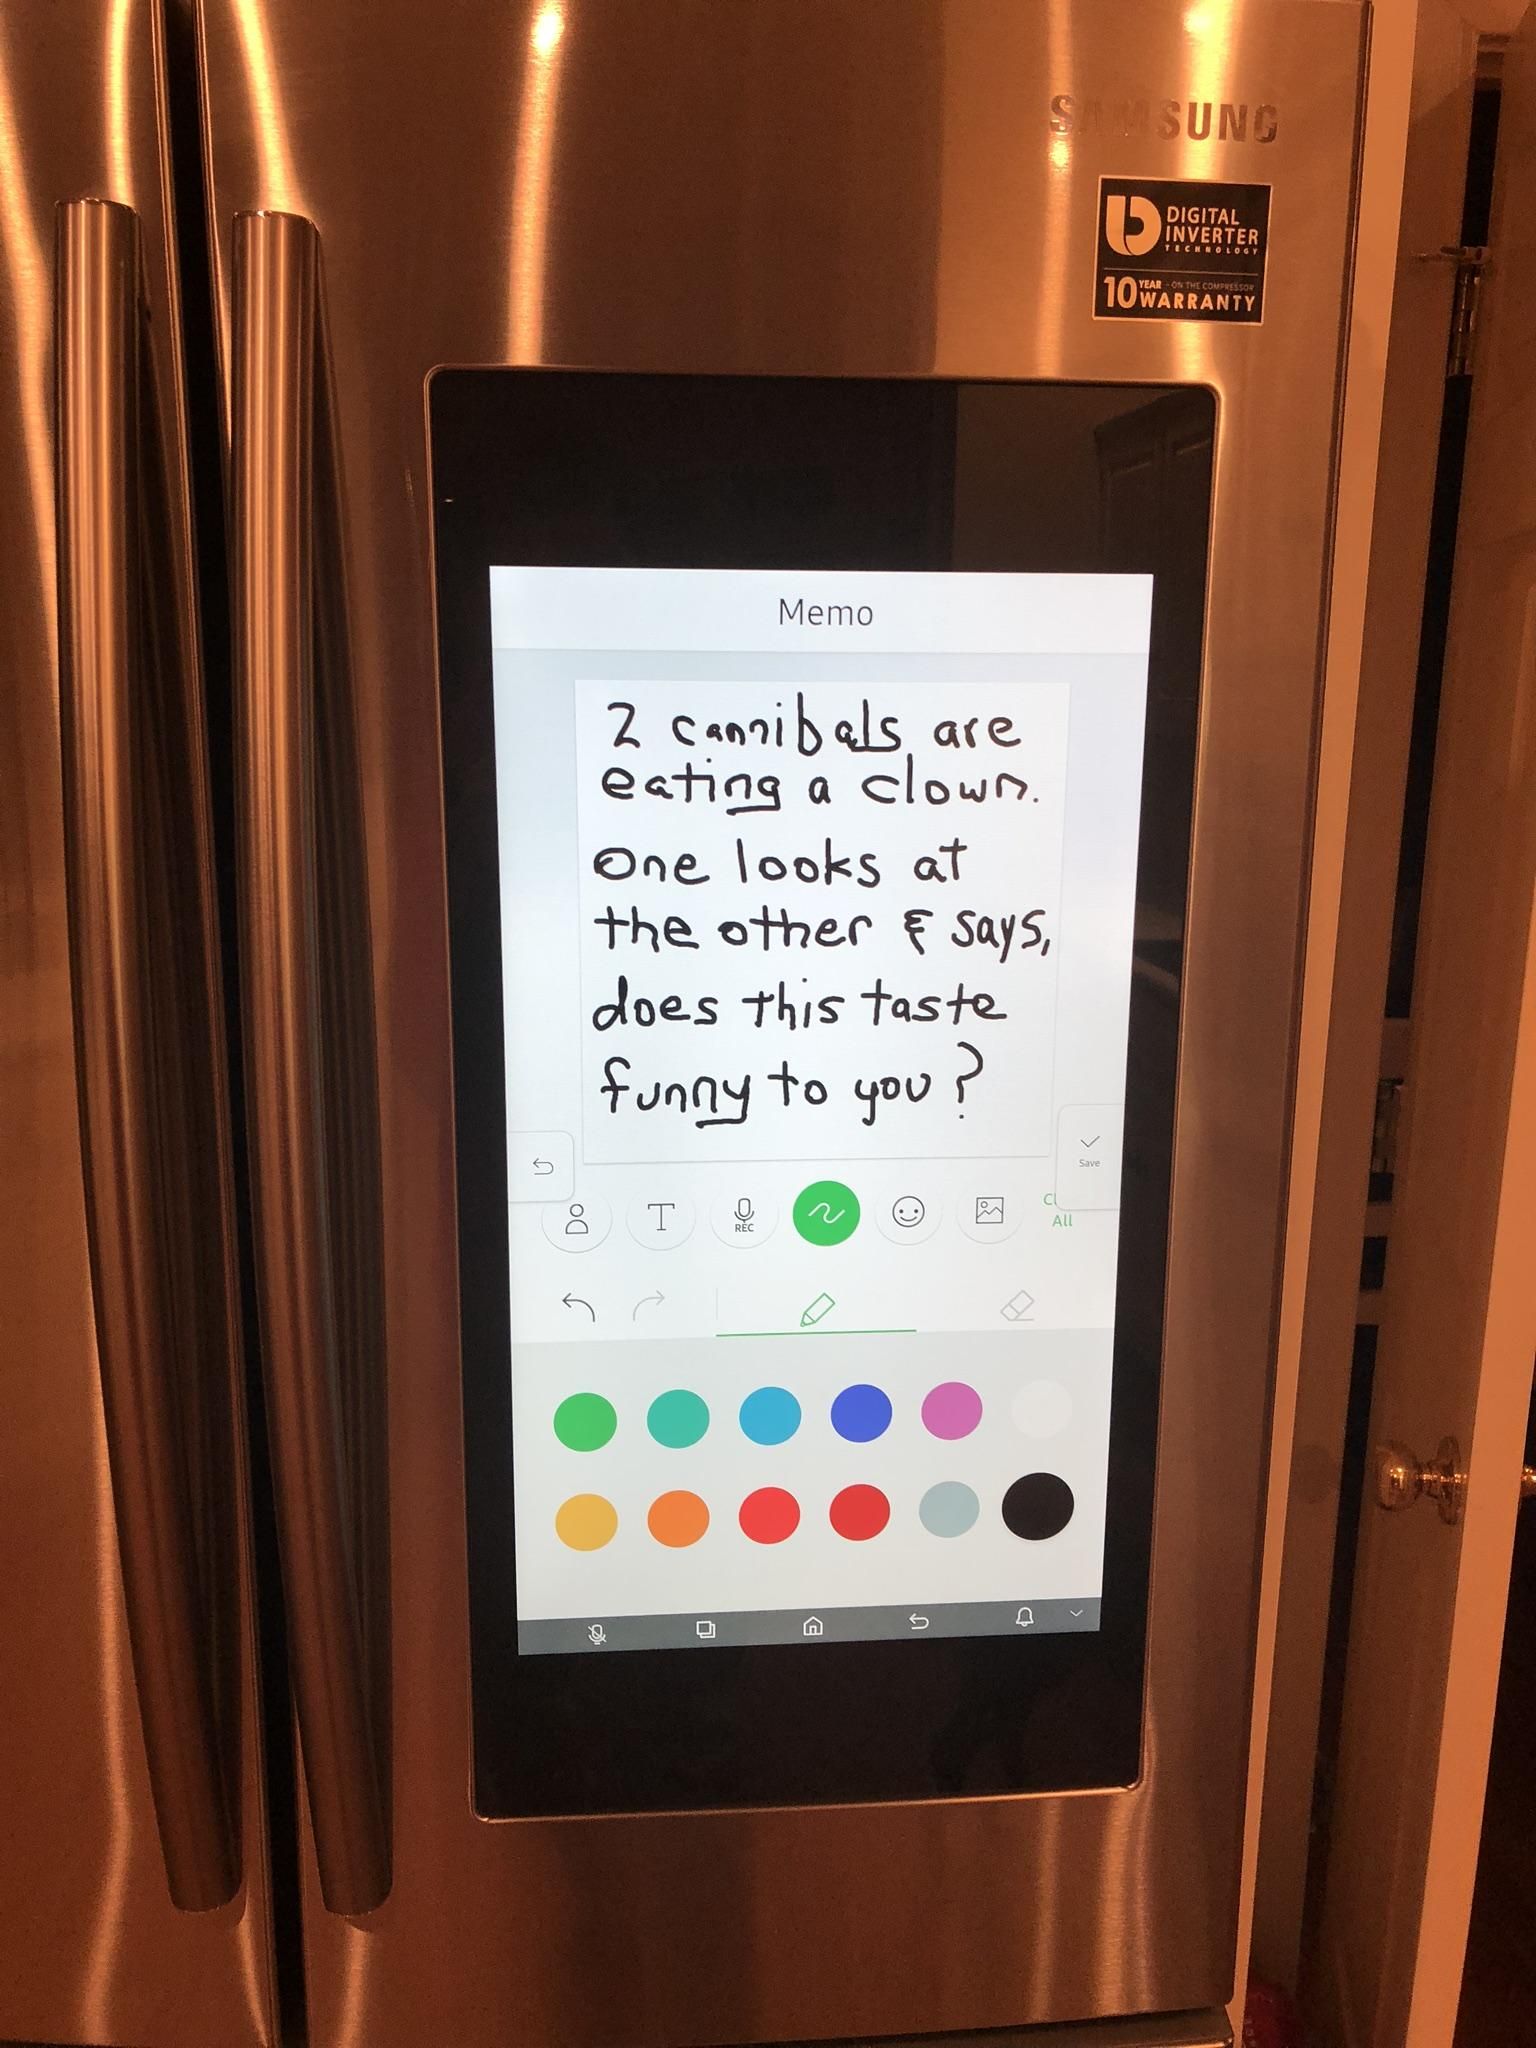 Bought a $3,000 fridge. Handyman installed it and left me a note.